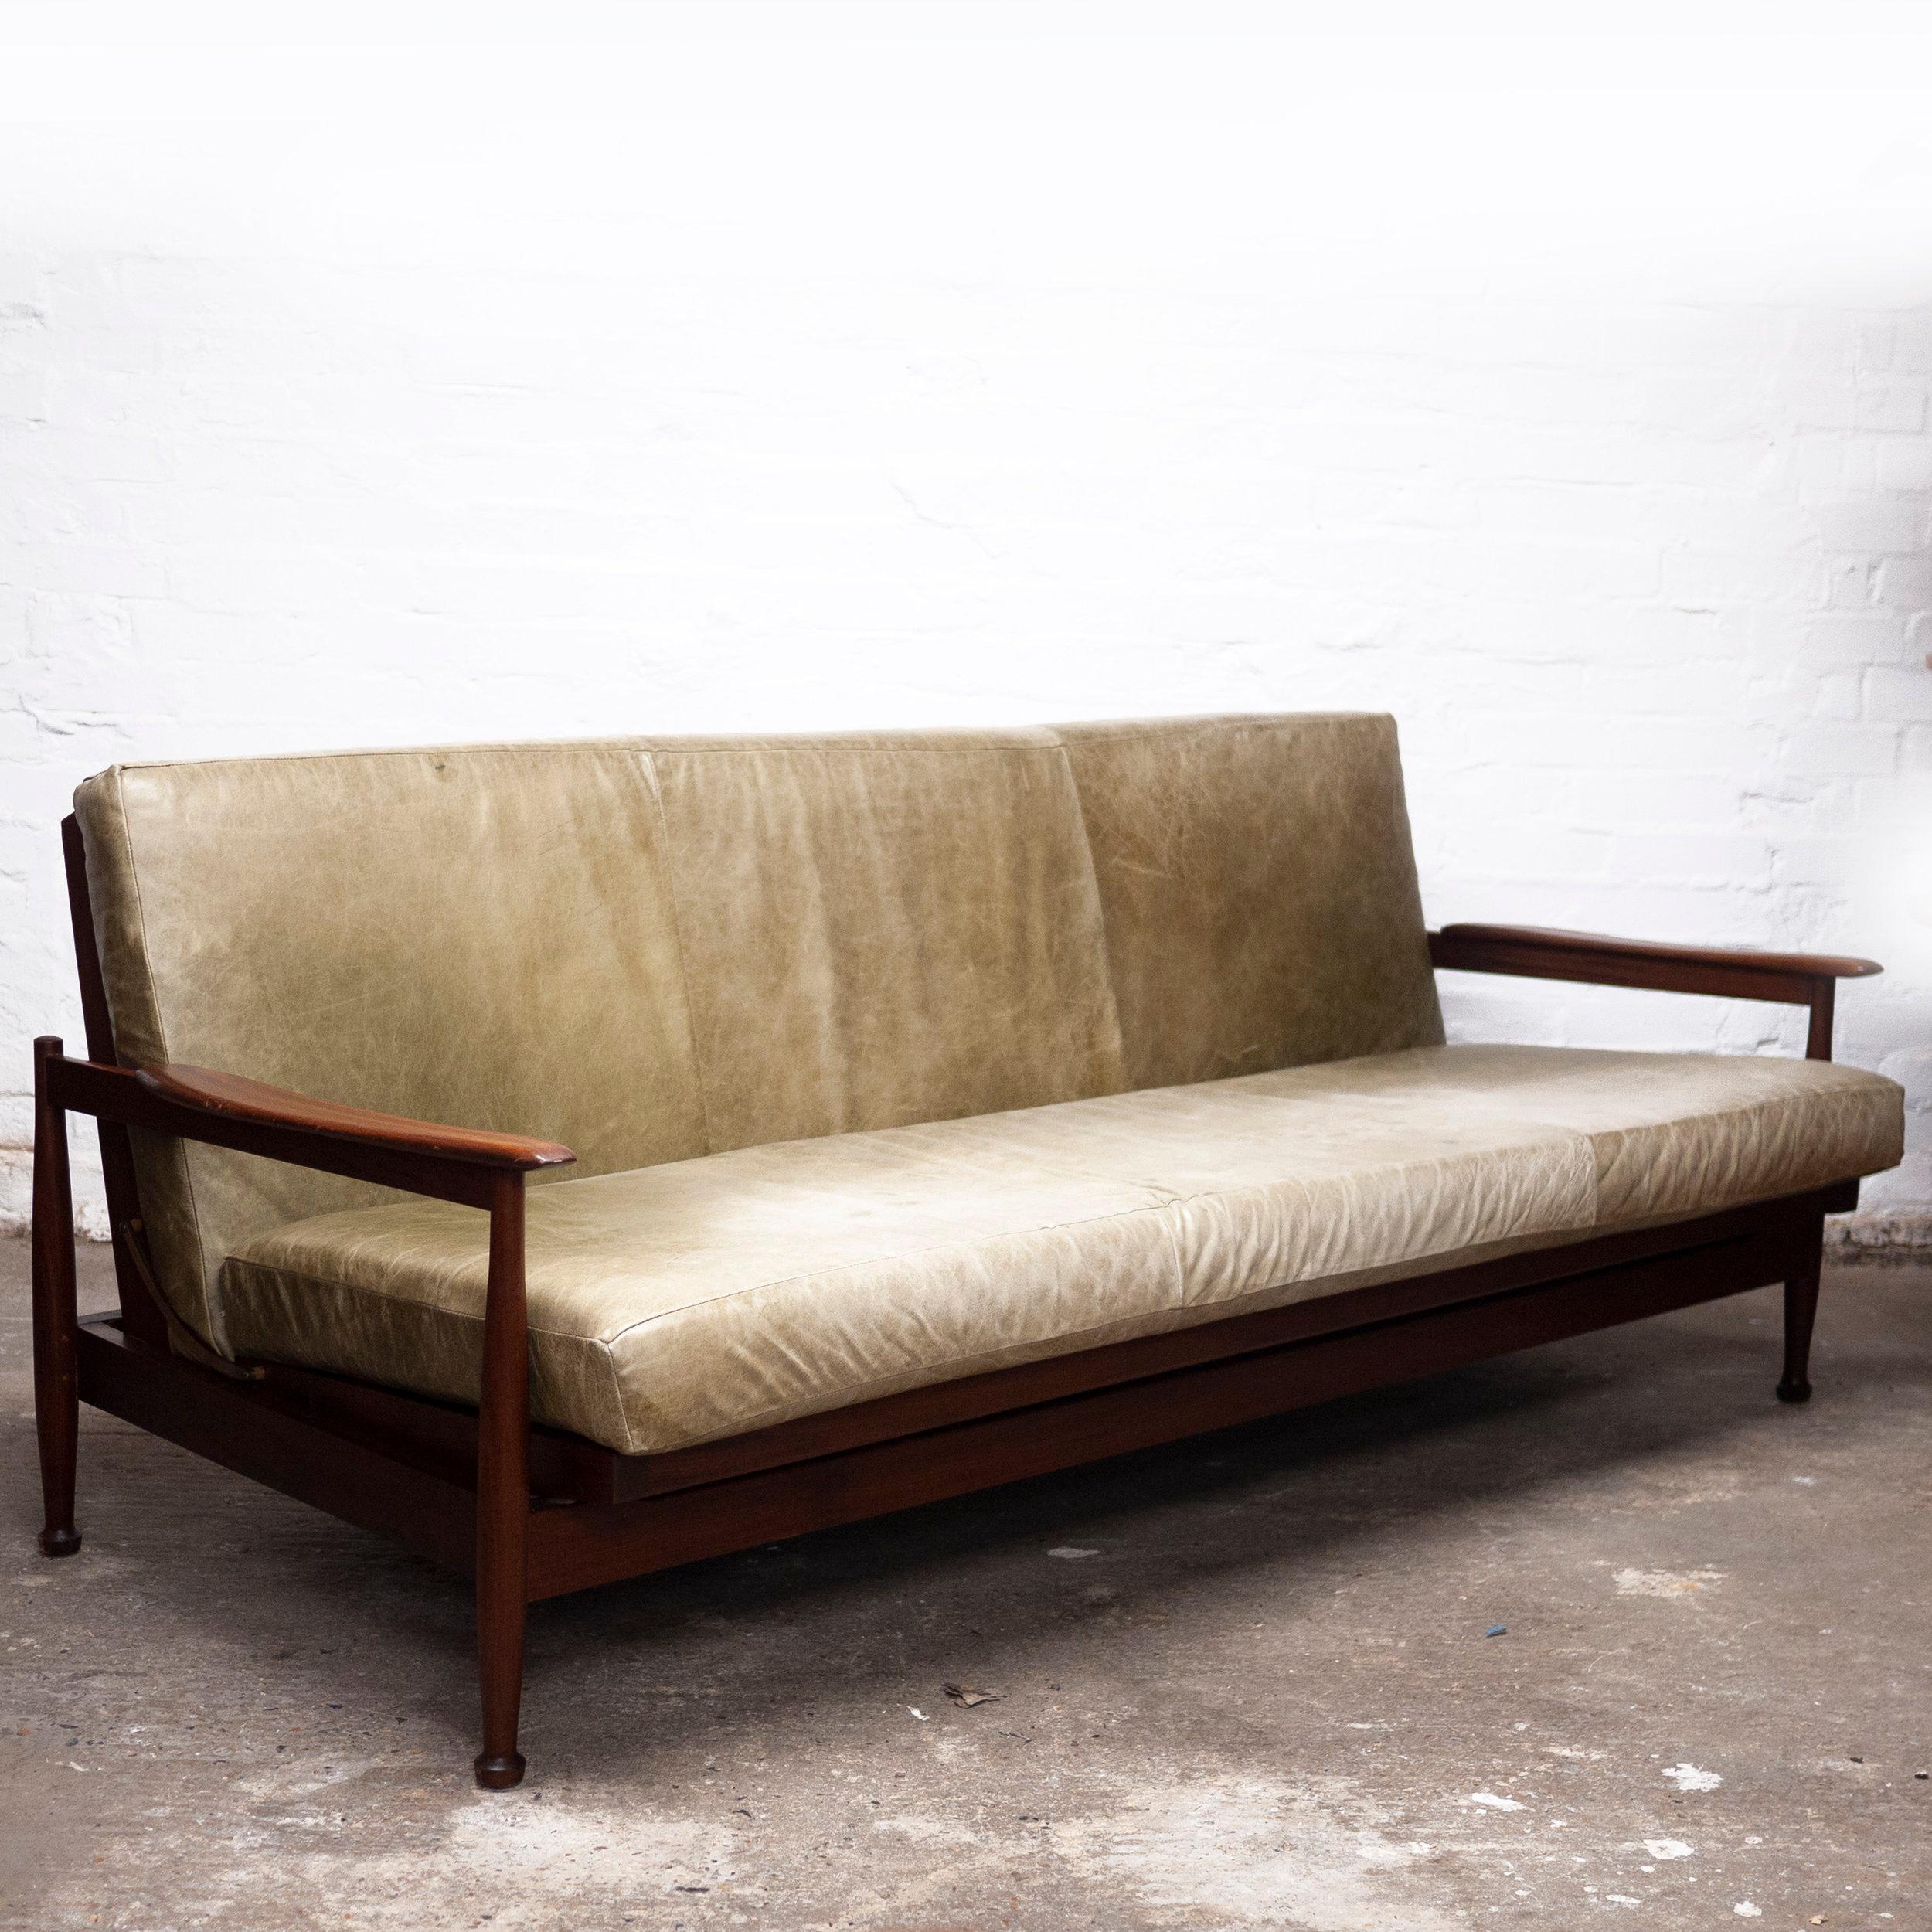 Mid-20th Century Manhattan Afromosia and Green Leather Sofa Bed by Guy Rogers, 1960s For Sale